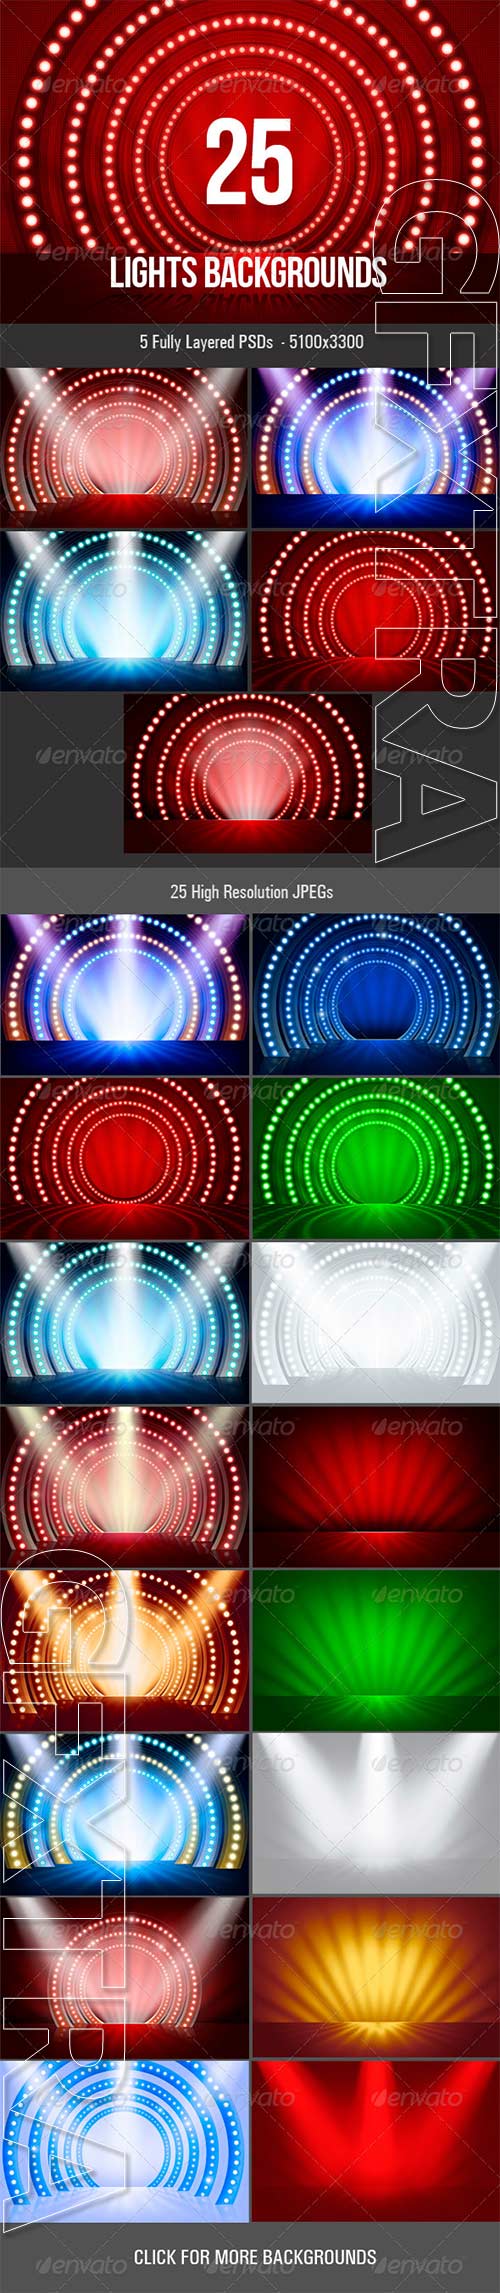 GraphicRiver - Lights Backgrounds